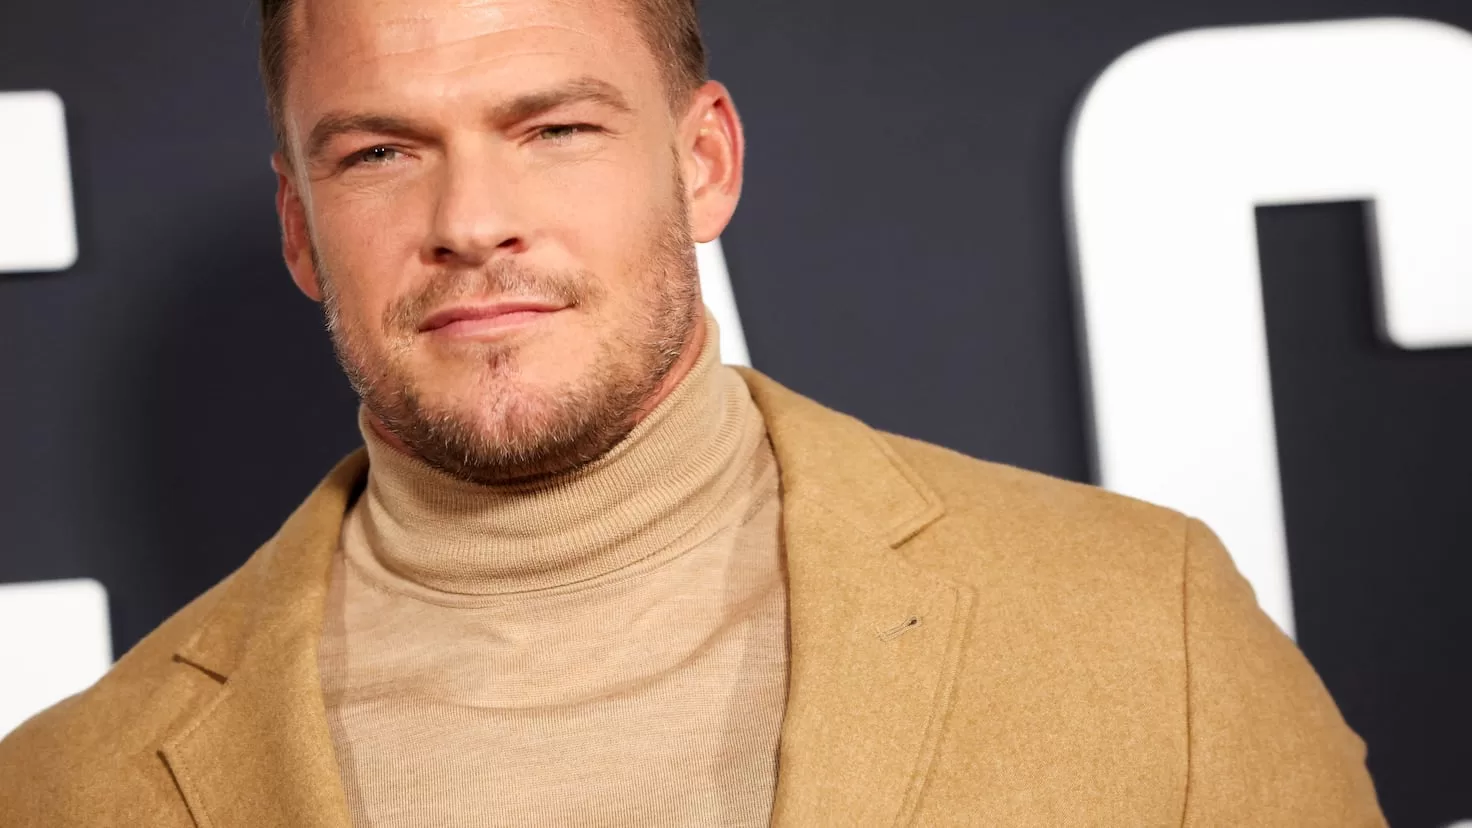 Actor Alan Ritchson, from Reacher, confesses that he tried to take his own life after suffering a sexual assault
